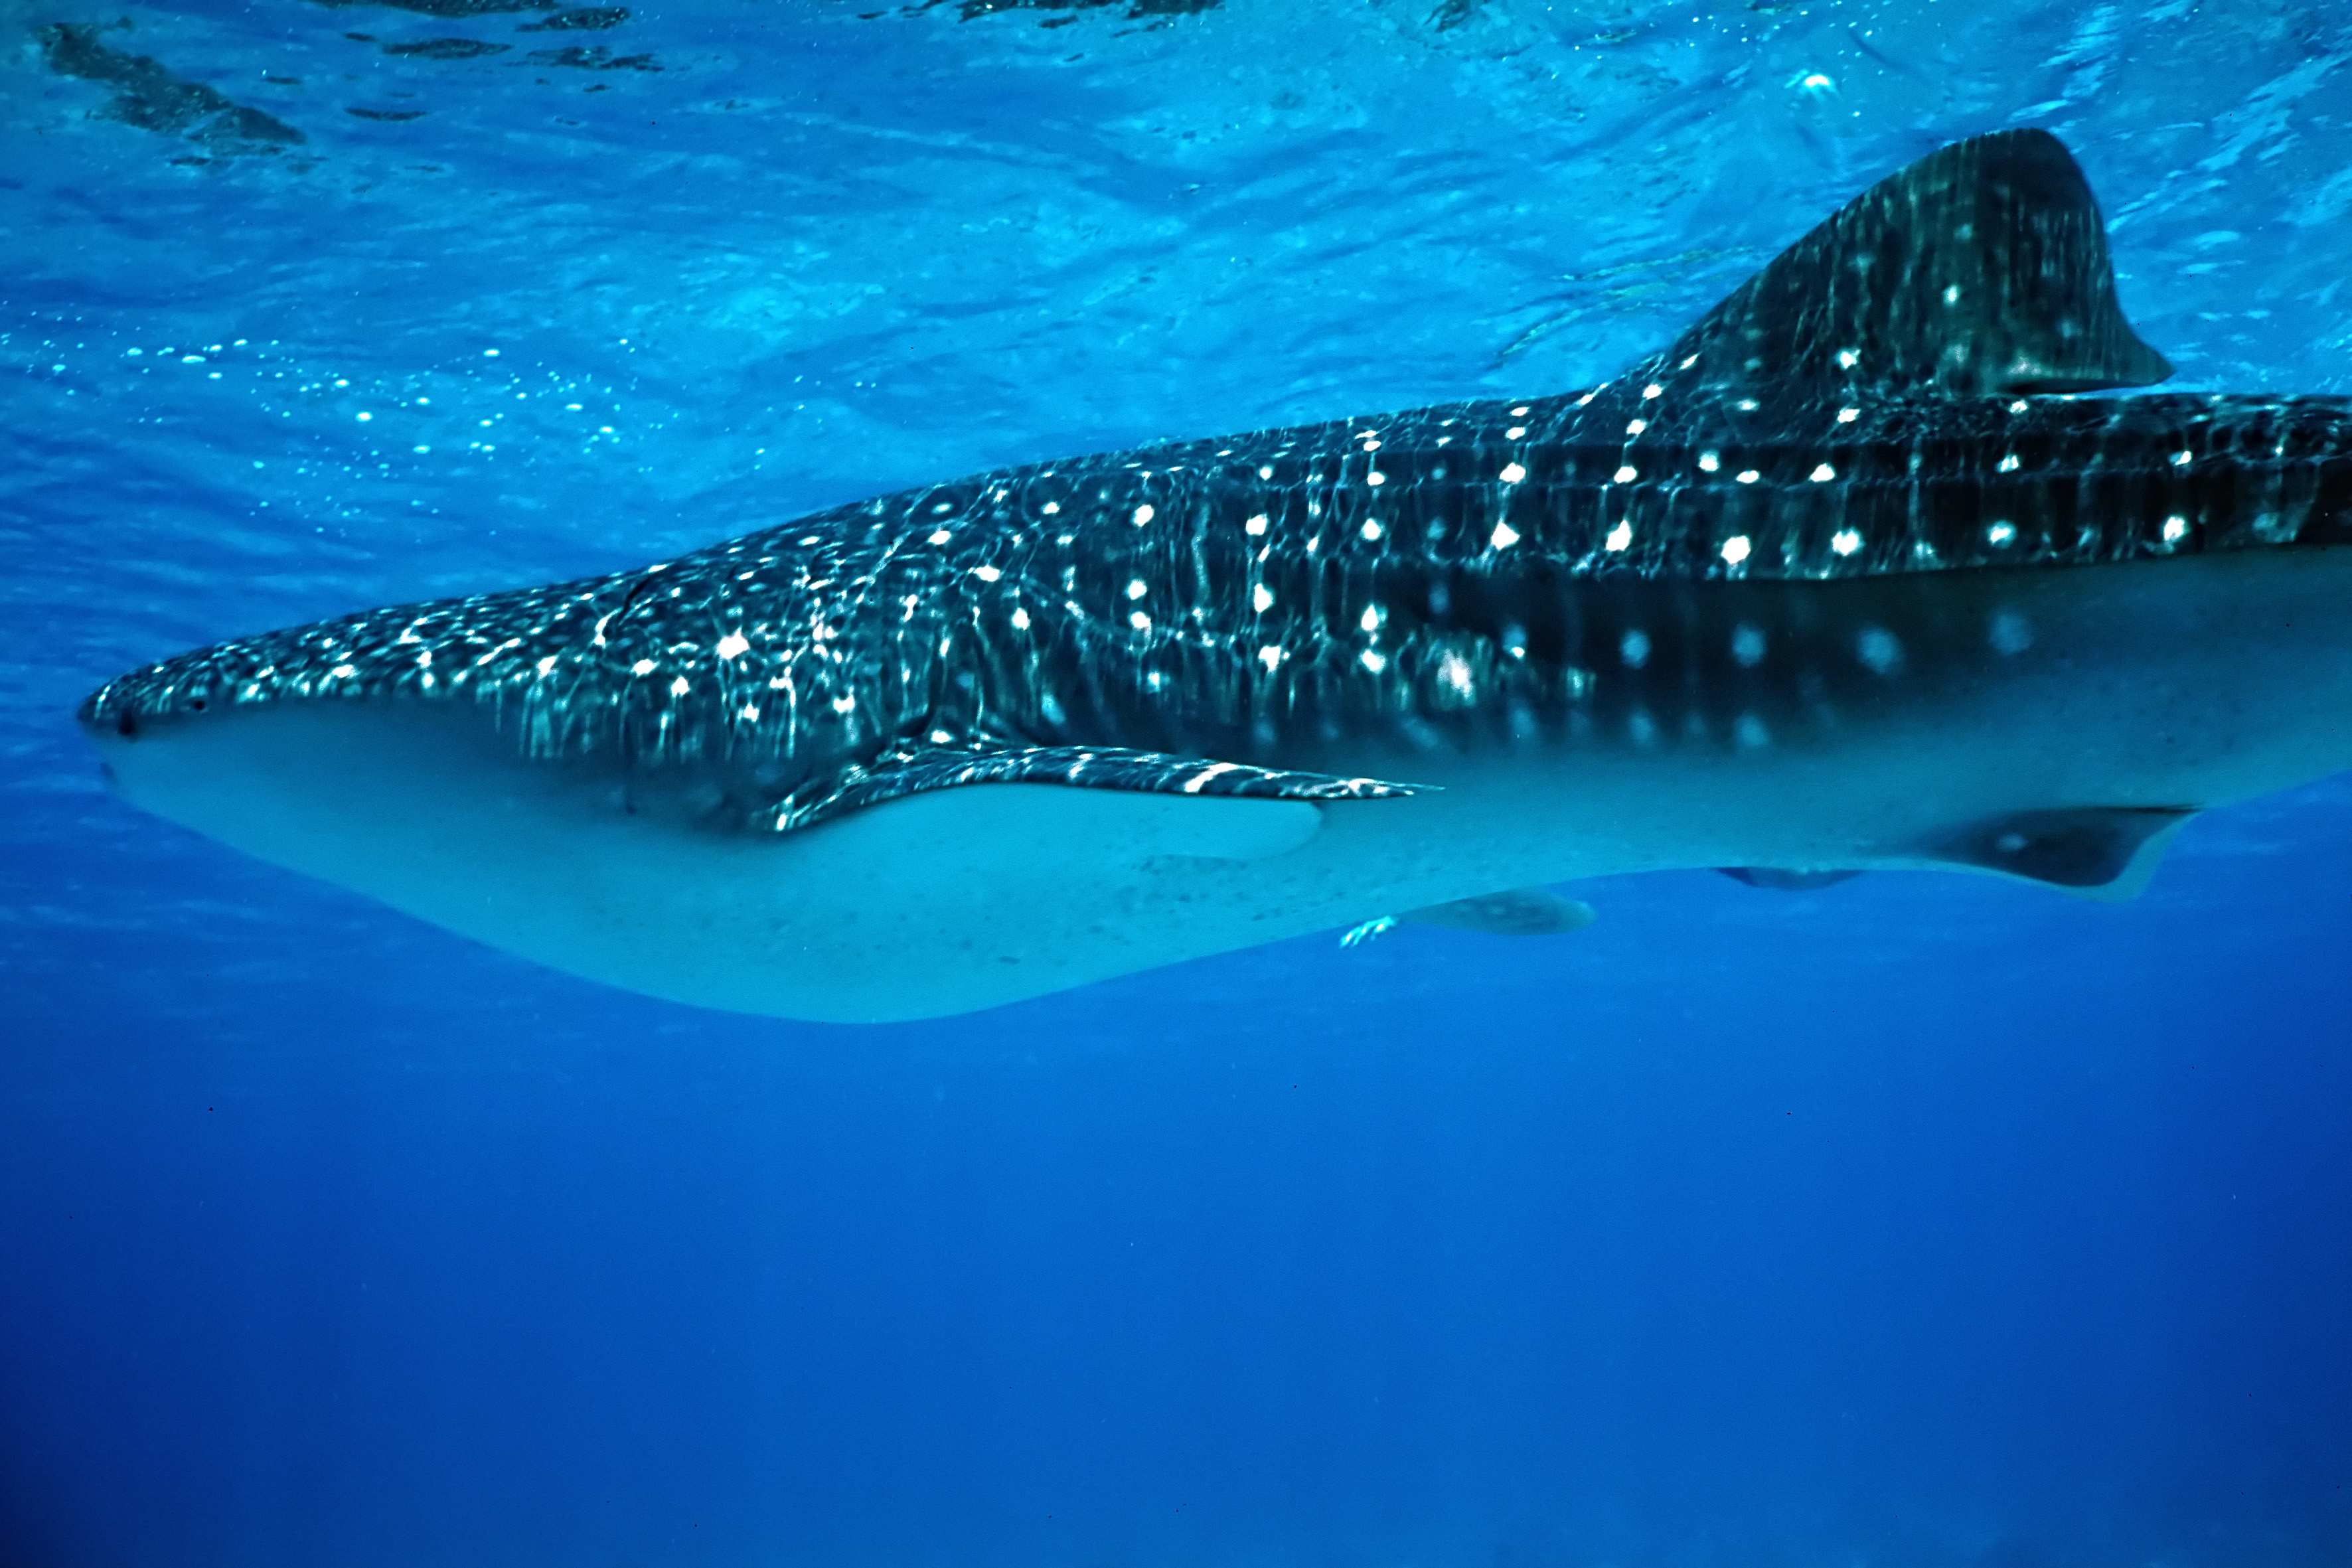 Whaleshark swims in the waters surrounding Ningaloo Reef in Australia providing divers and animal lovers alike with the ultimate underwater animal encounter